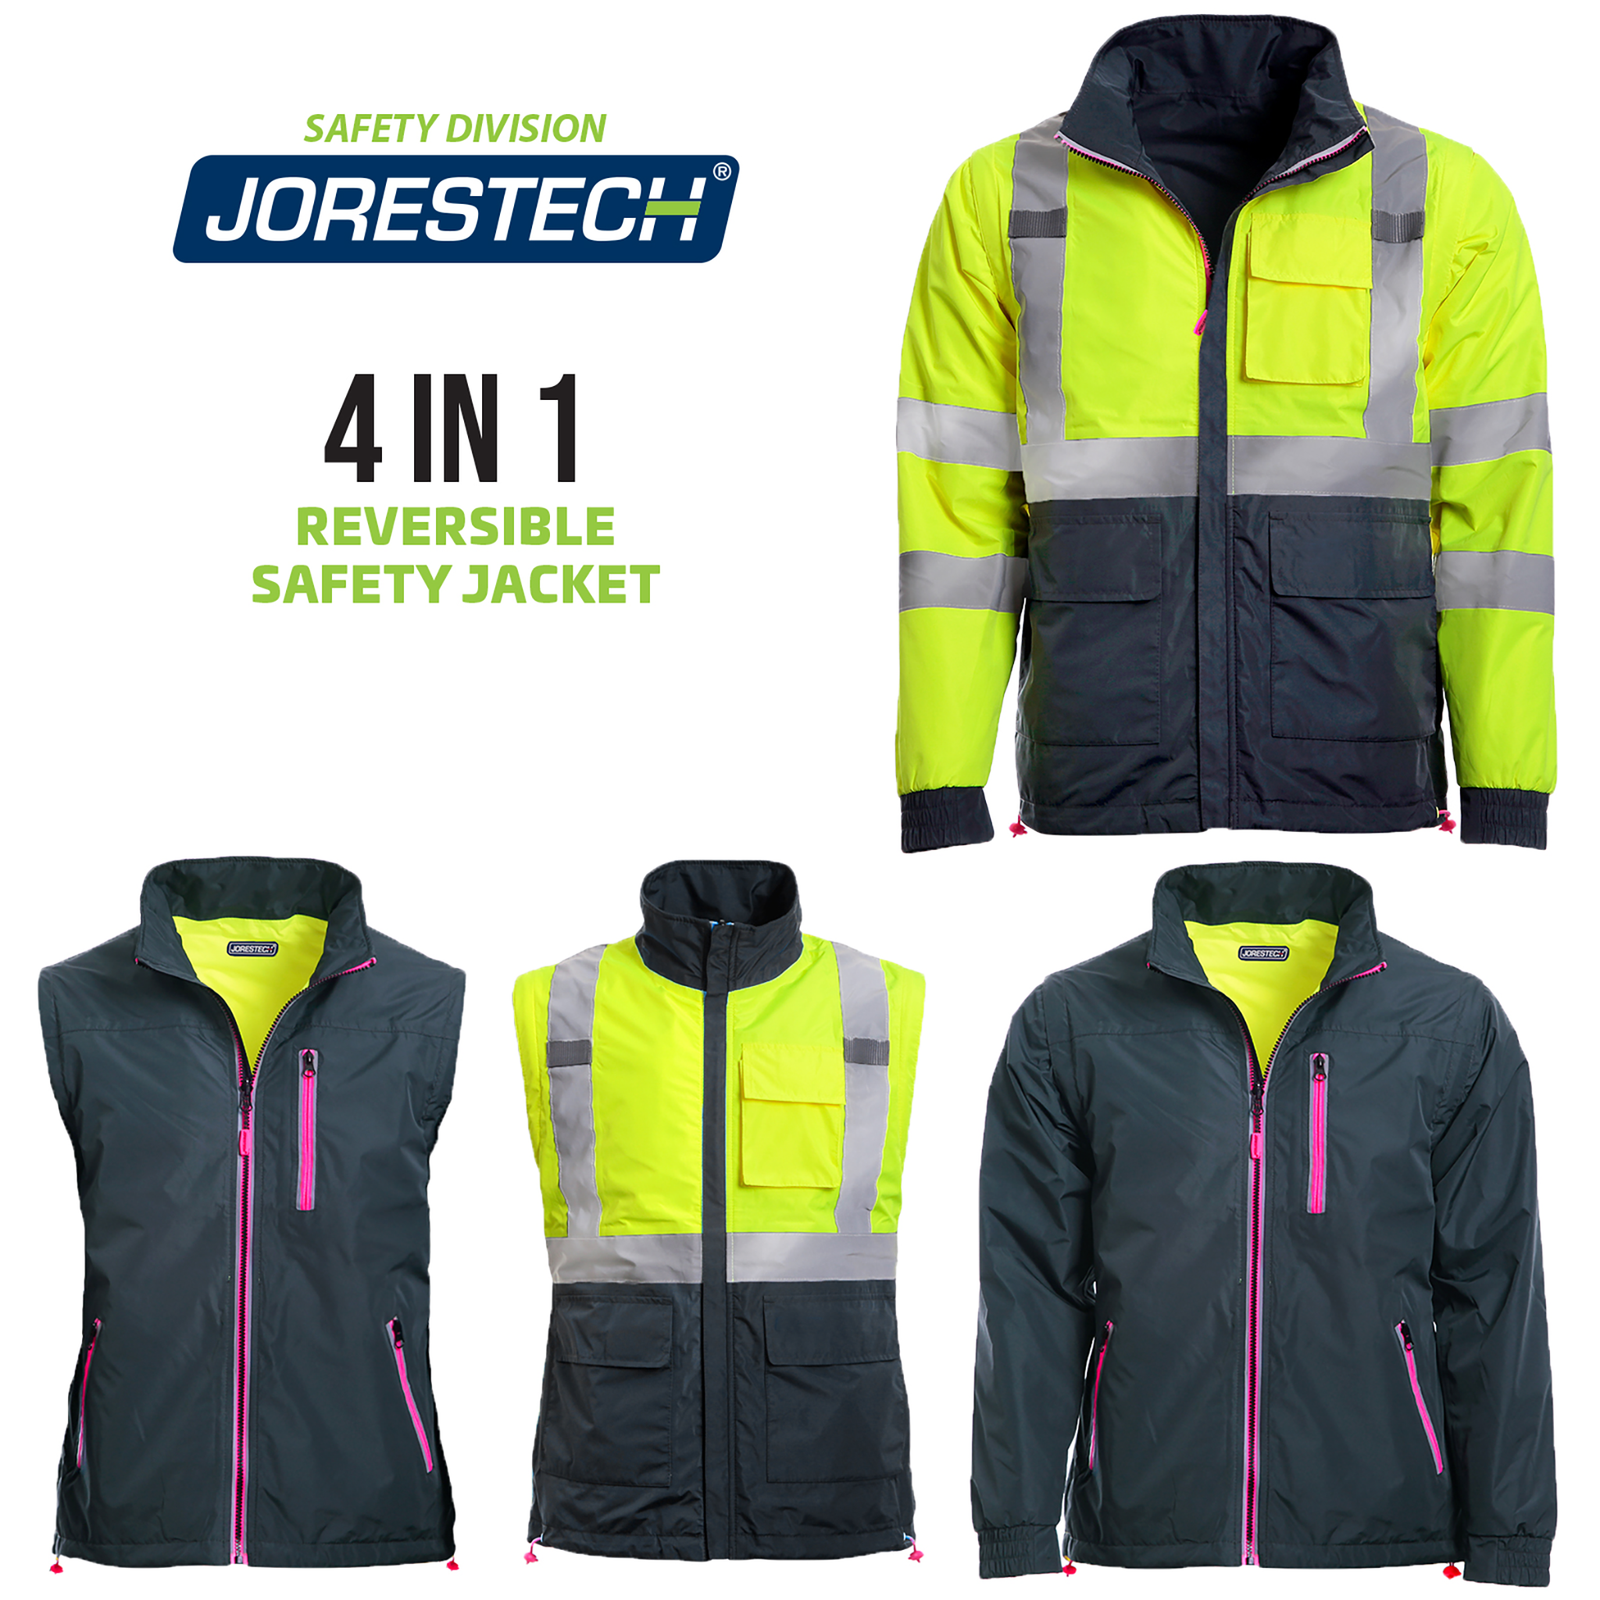 The 4 in 1 hi vis yellow and pink reversible safety jacket with removable sleeves .  Features views of the jacket showing: the reflective jacket. A reflective vest. A non reflective side as a vest. A non reflective jacket. Text reads 4 in 1 reversible safety jacket and vest.